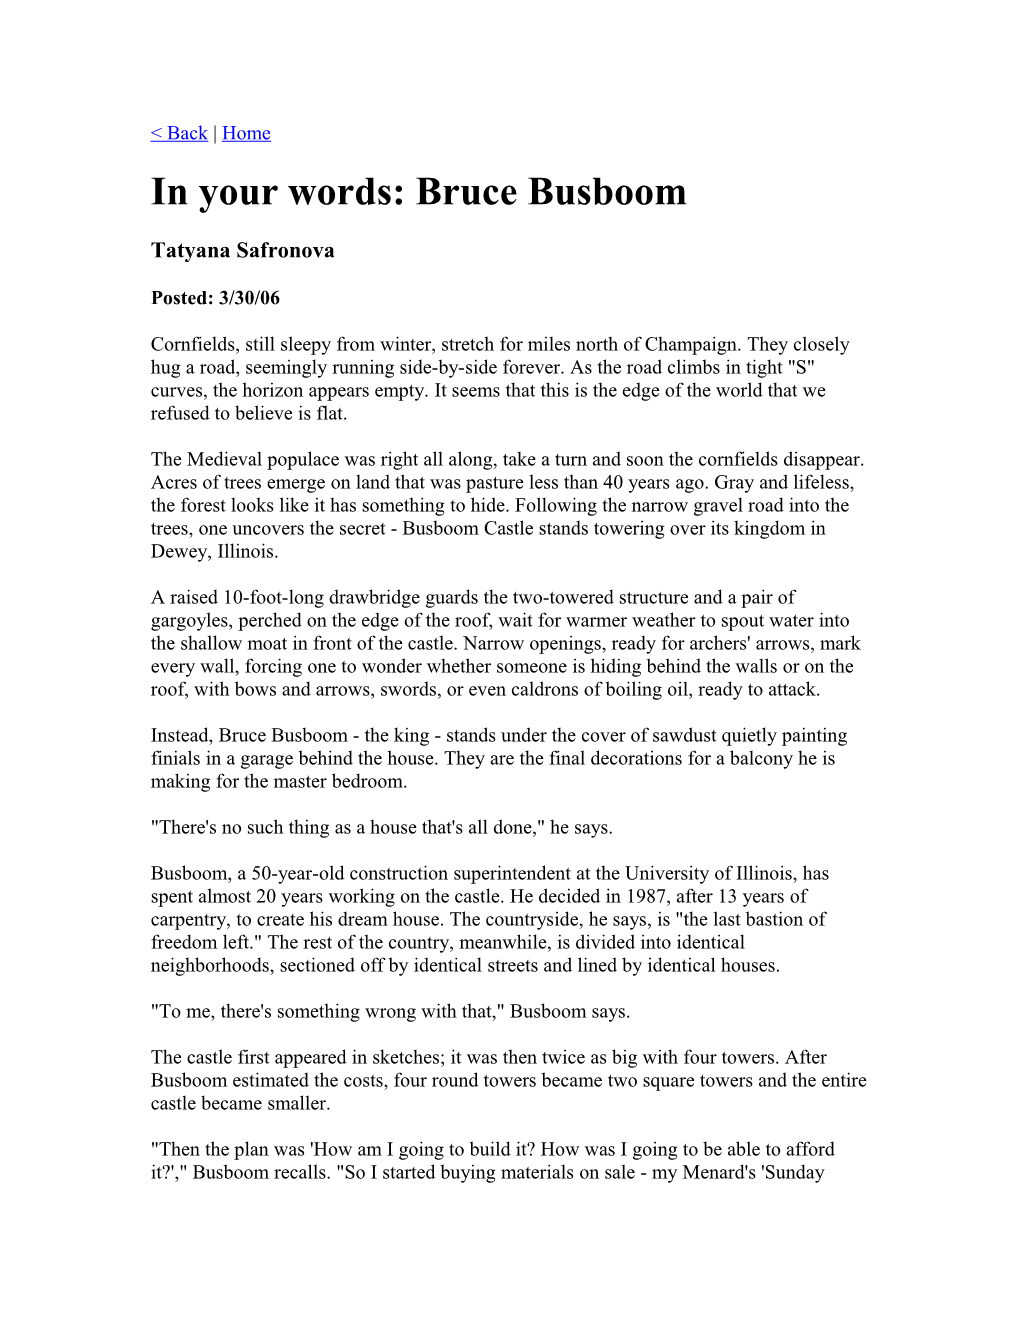 In Your Words: Bruce Busboom